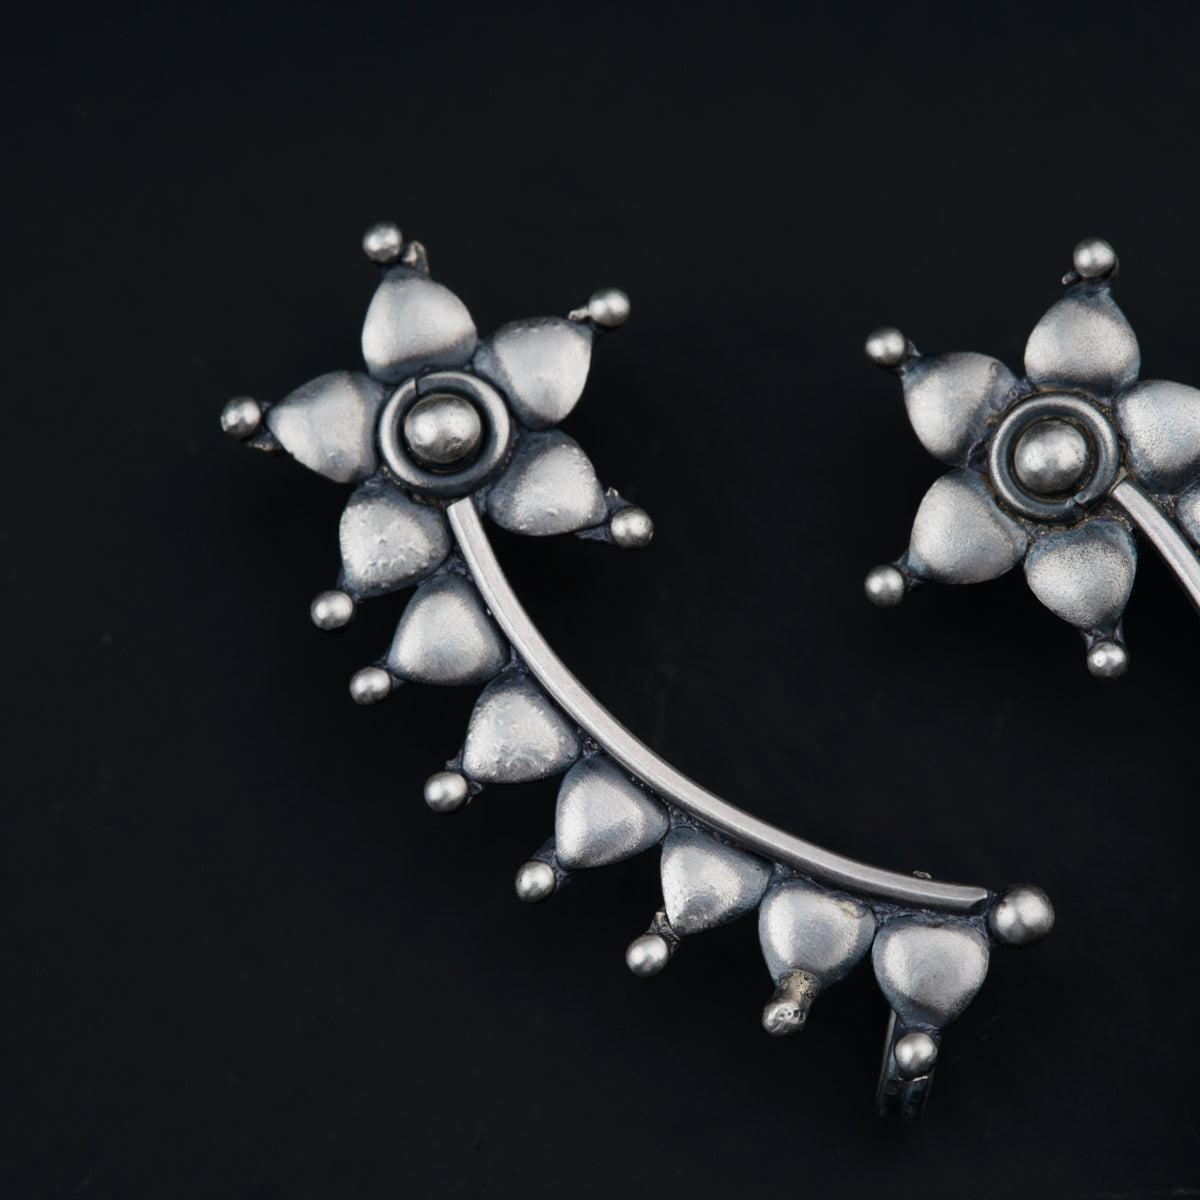 a pair of silver colored earrings on a black background